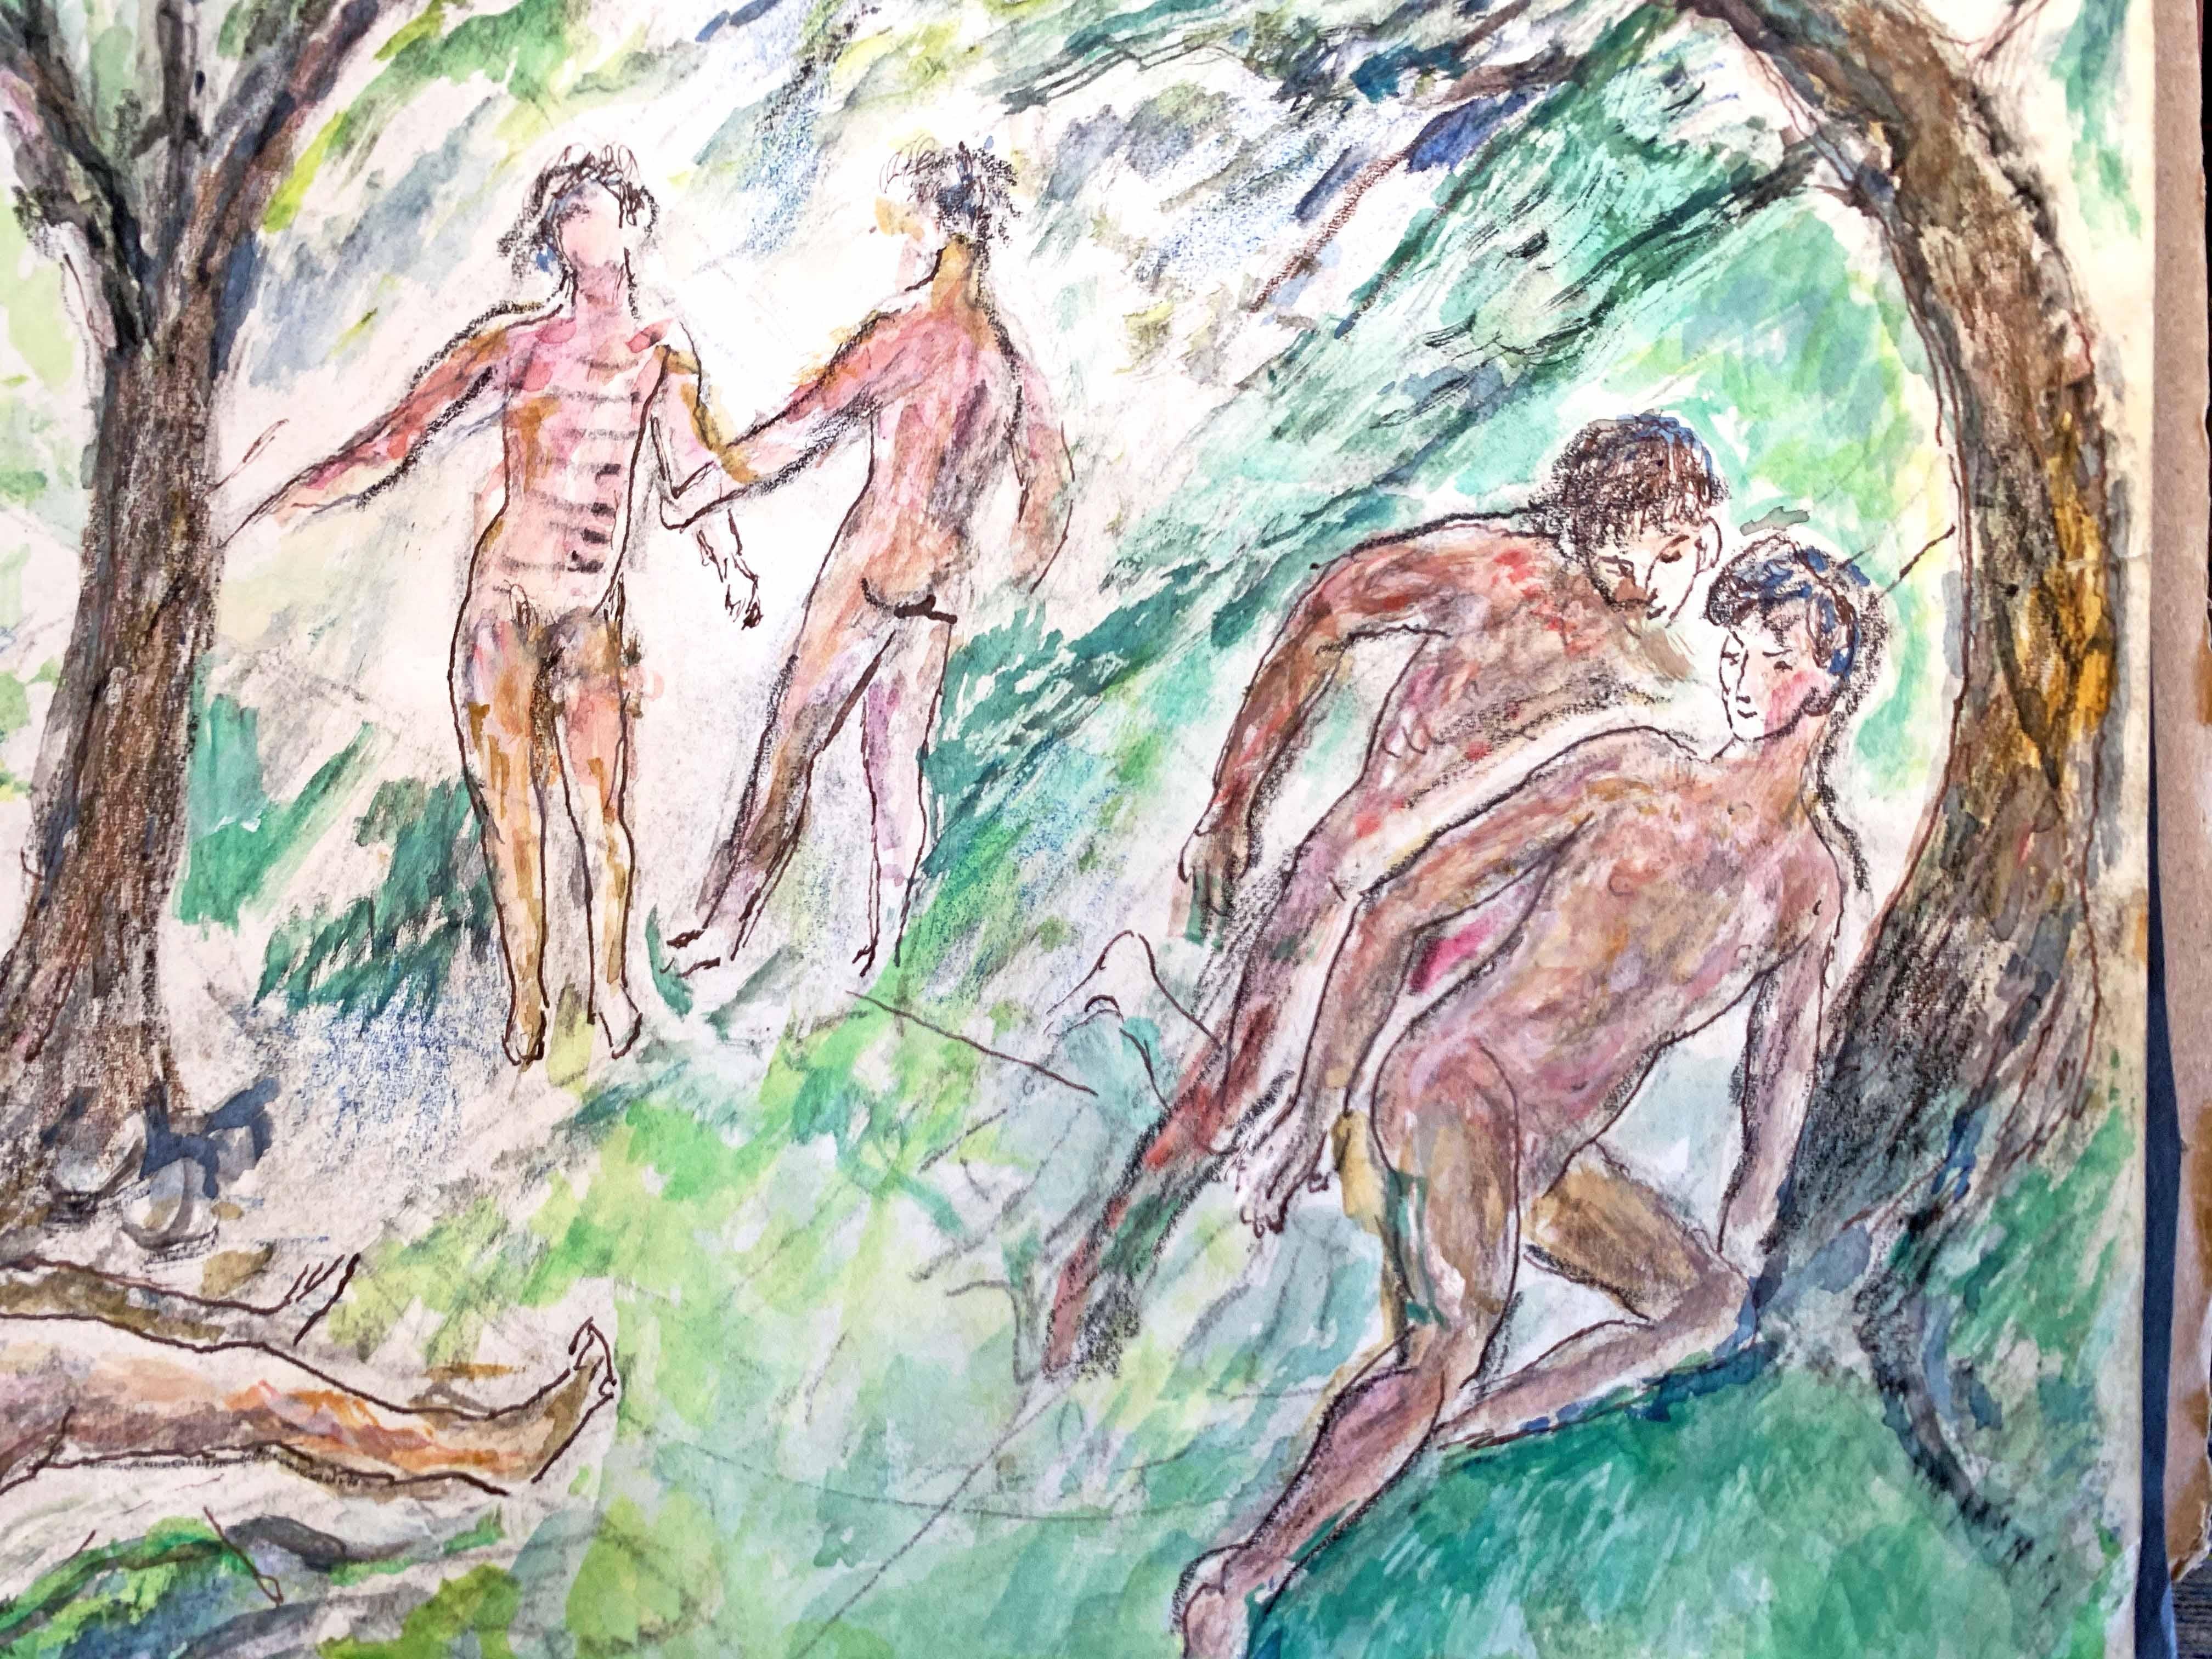 Full of atmosphere and fresh color, this watercolor painting depicts a group of eight nude male figures in a wooded setting, holding hands, talking, admiring the view, and stealing off for a romantic moment, all expressed in vivid pink and tan flesh